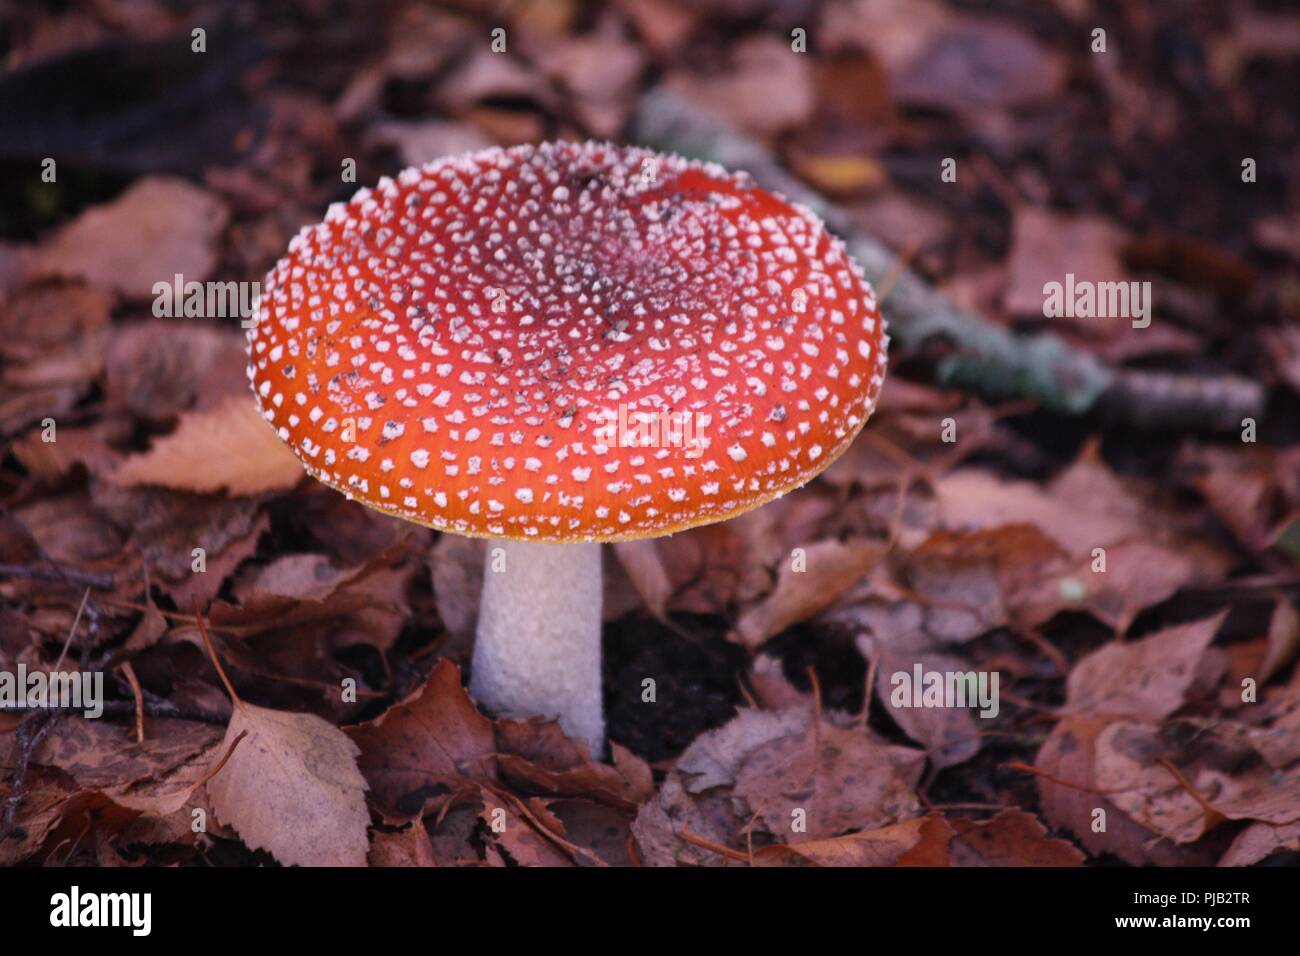 Toadstool in my backyard sitting  amongst the fallen leaves and twigs  from the season's Autumn shedding, this rosey red cap is beautiful. Stock Photo